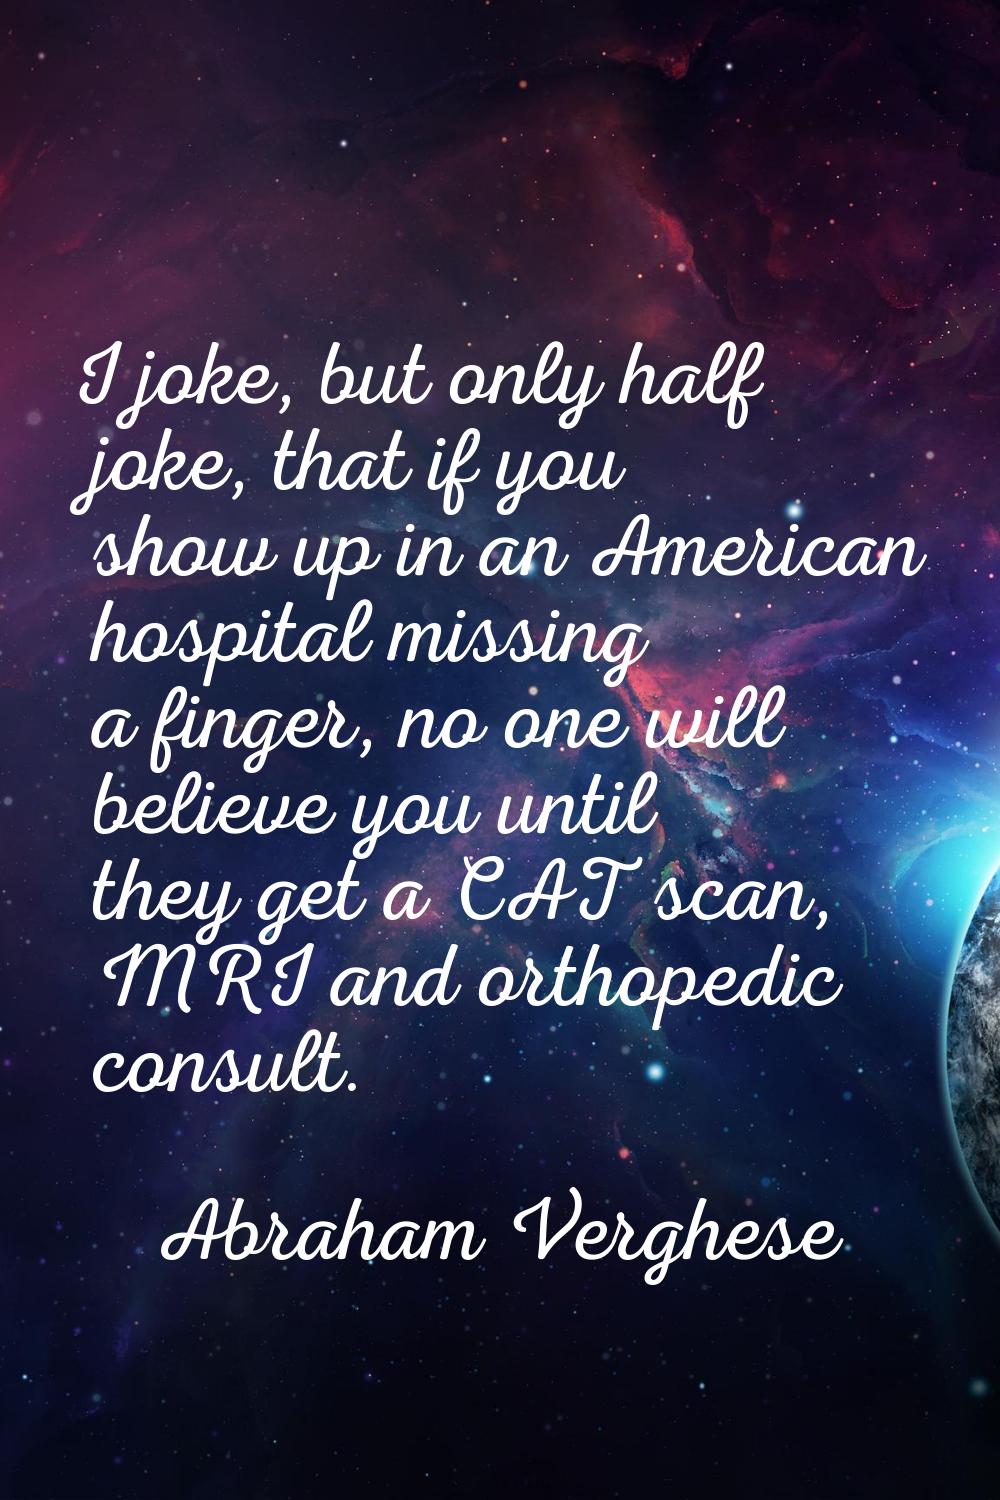 I joke, but only half joke, that if you show up in an American hospital missing a finger, no one wi